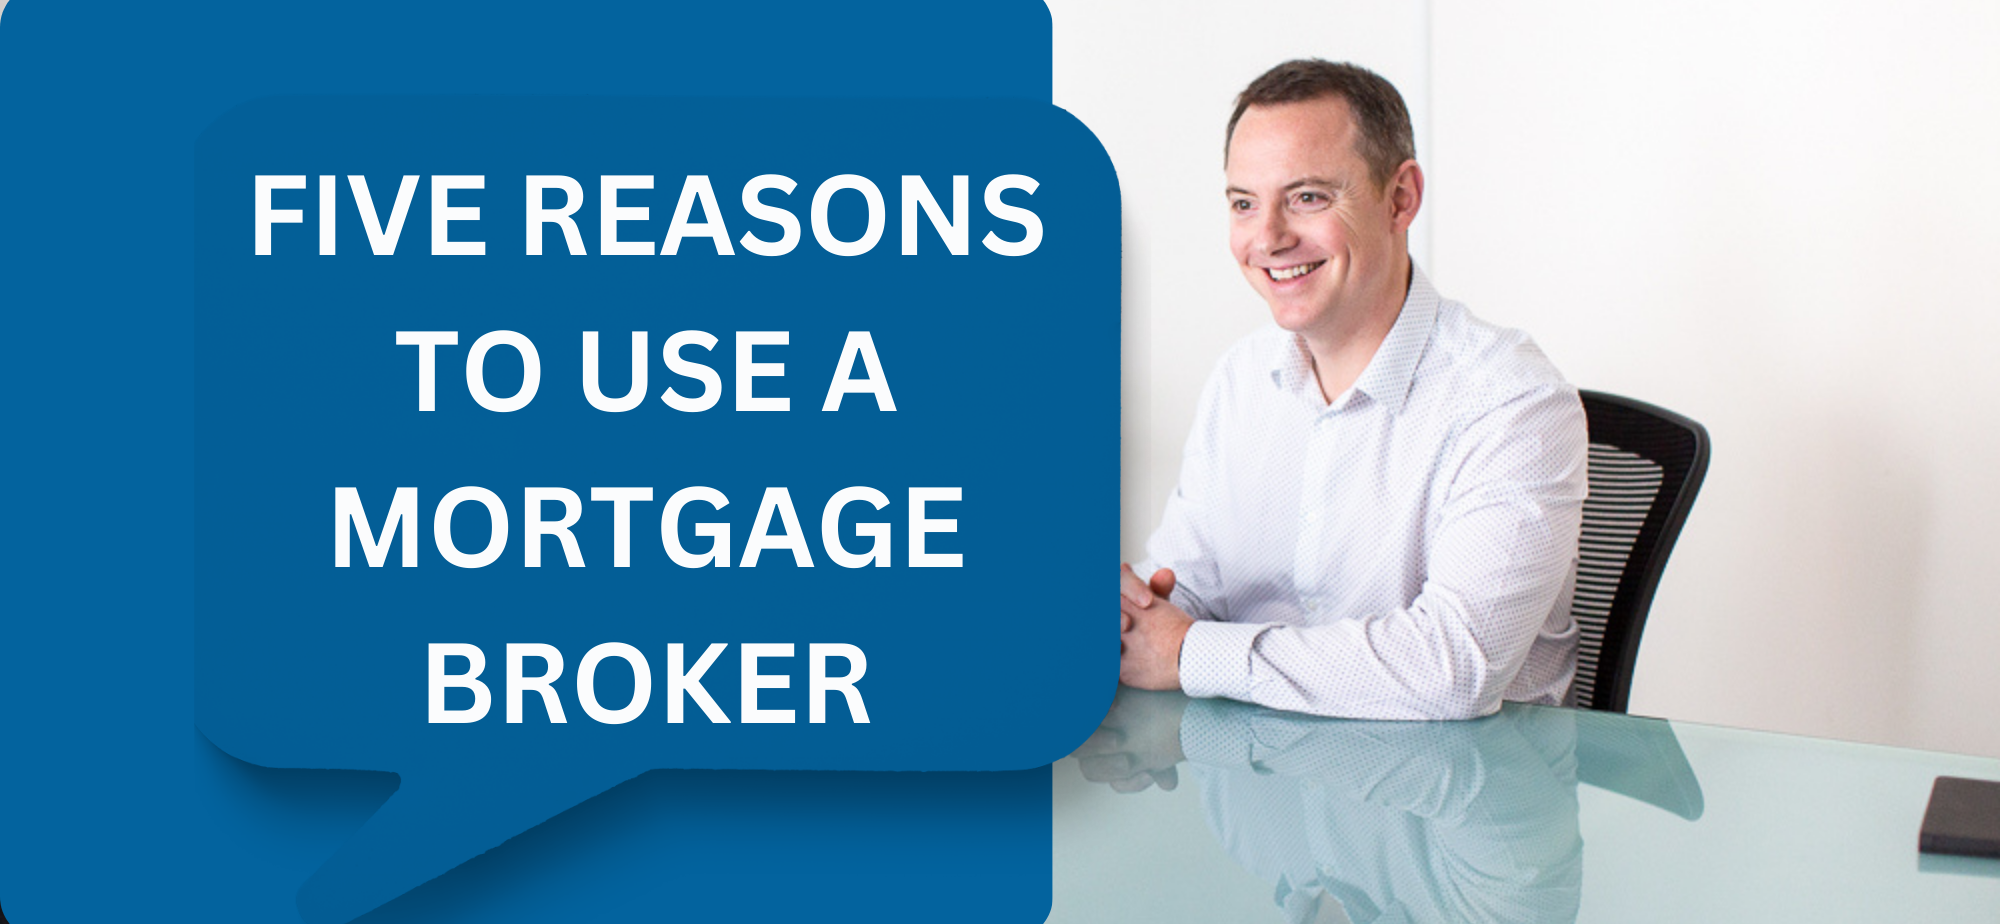 Five Reasons to use a mortgage broker